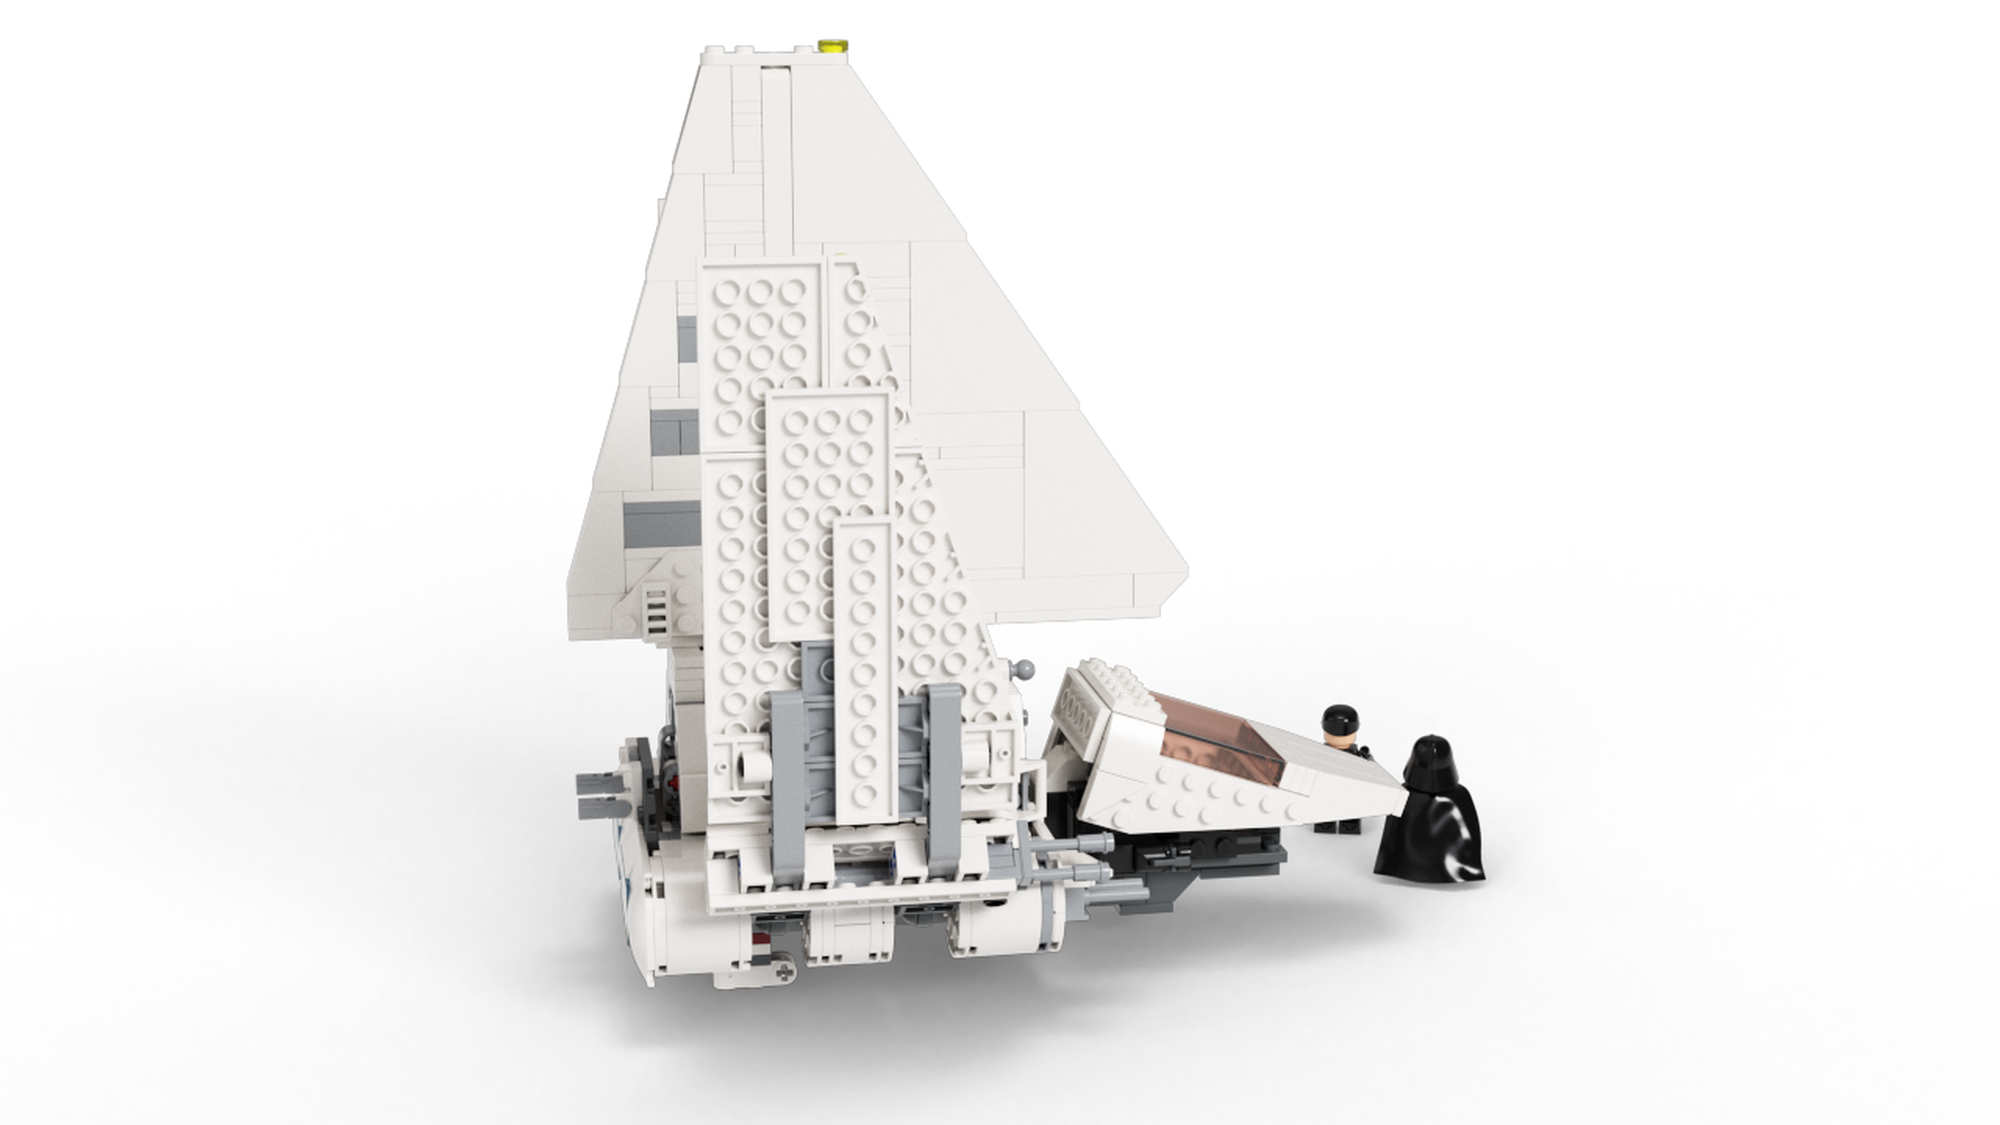 LEGO Star Wars Imperial Shuttle 75302 Building Toy (660 Pieces)